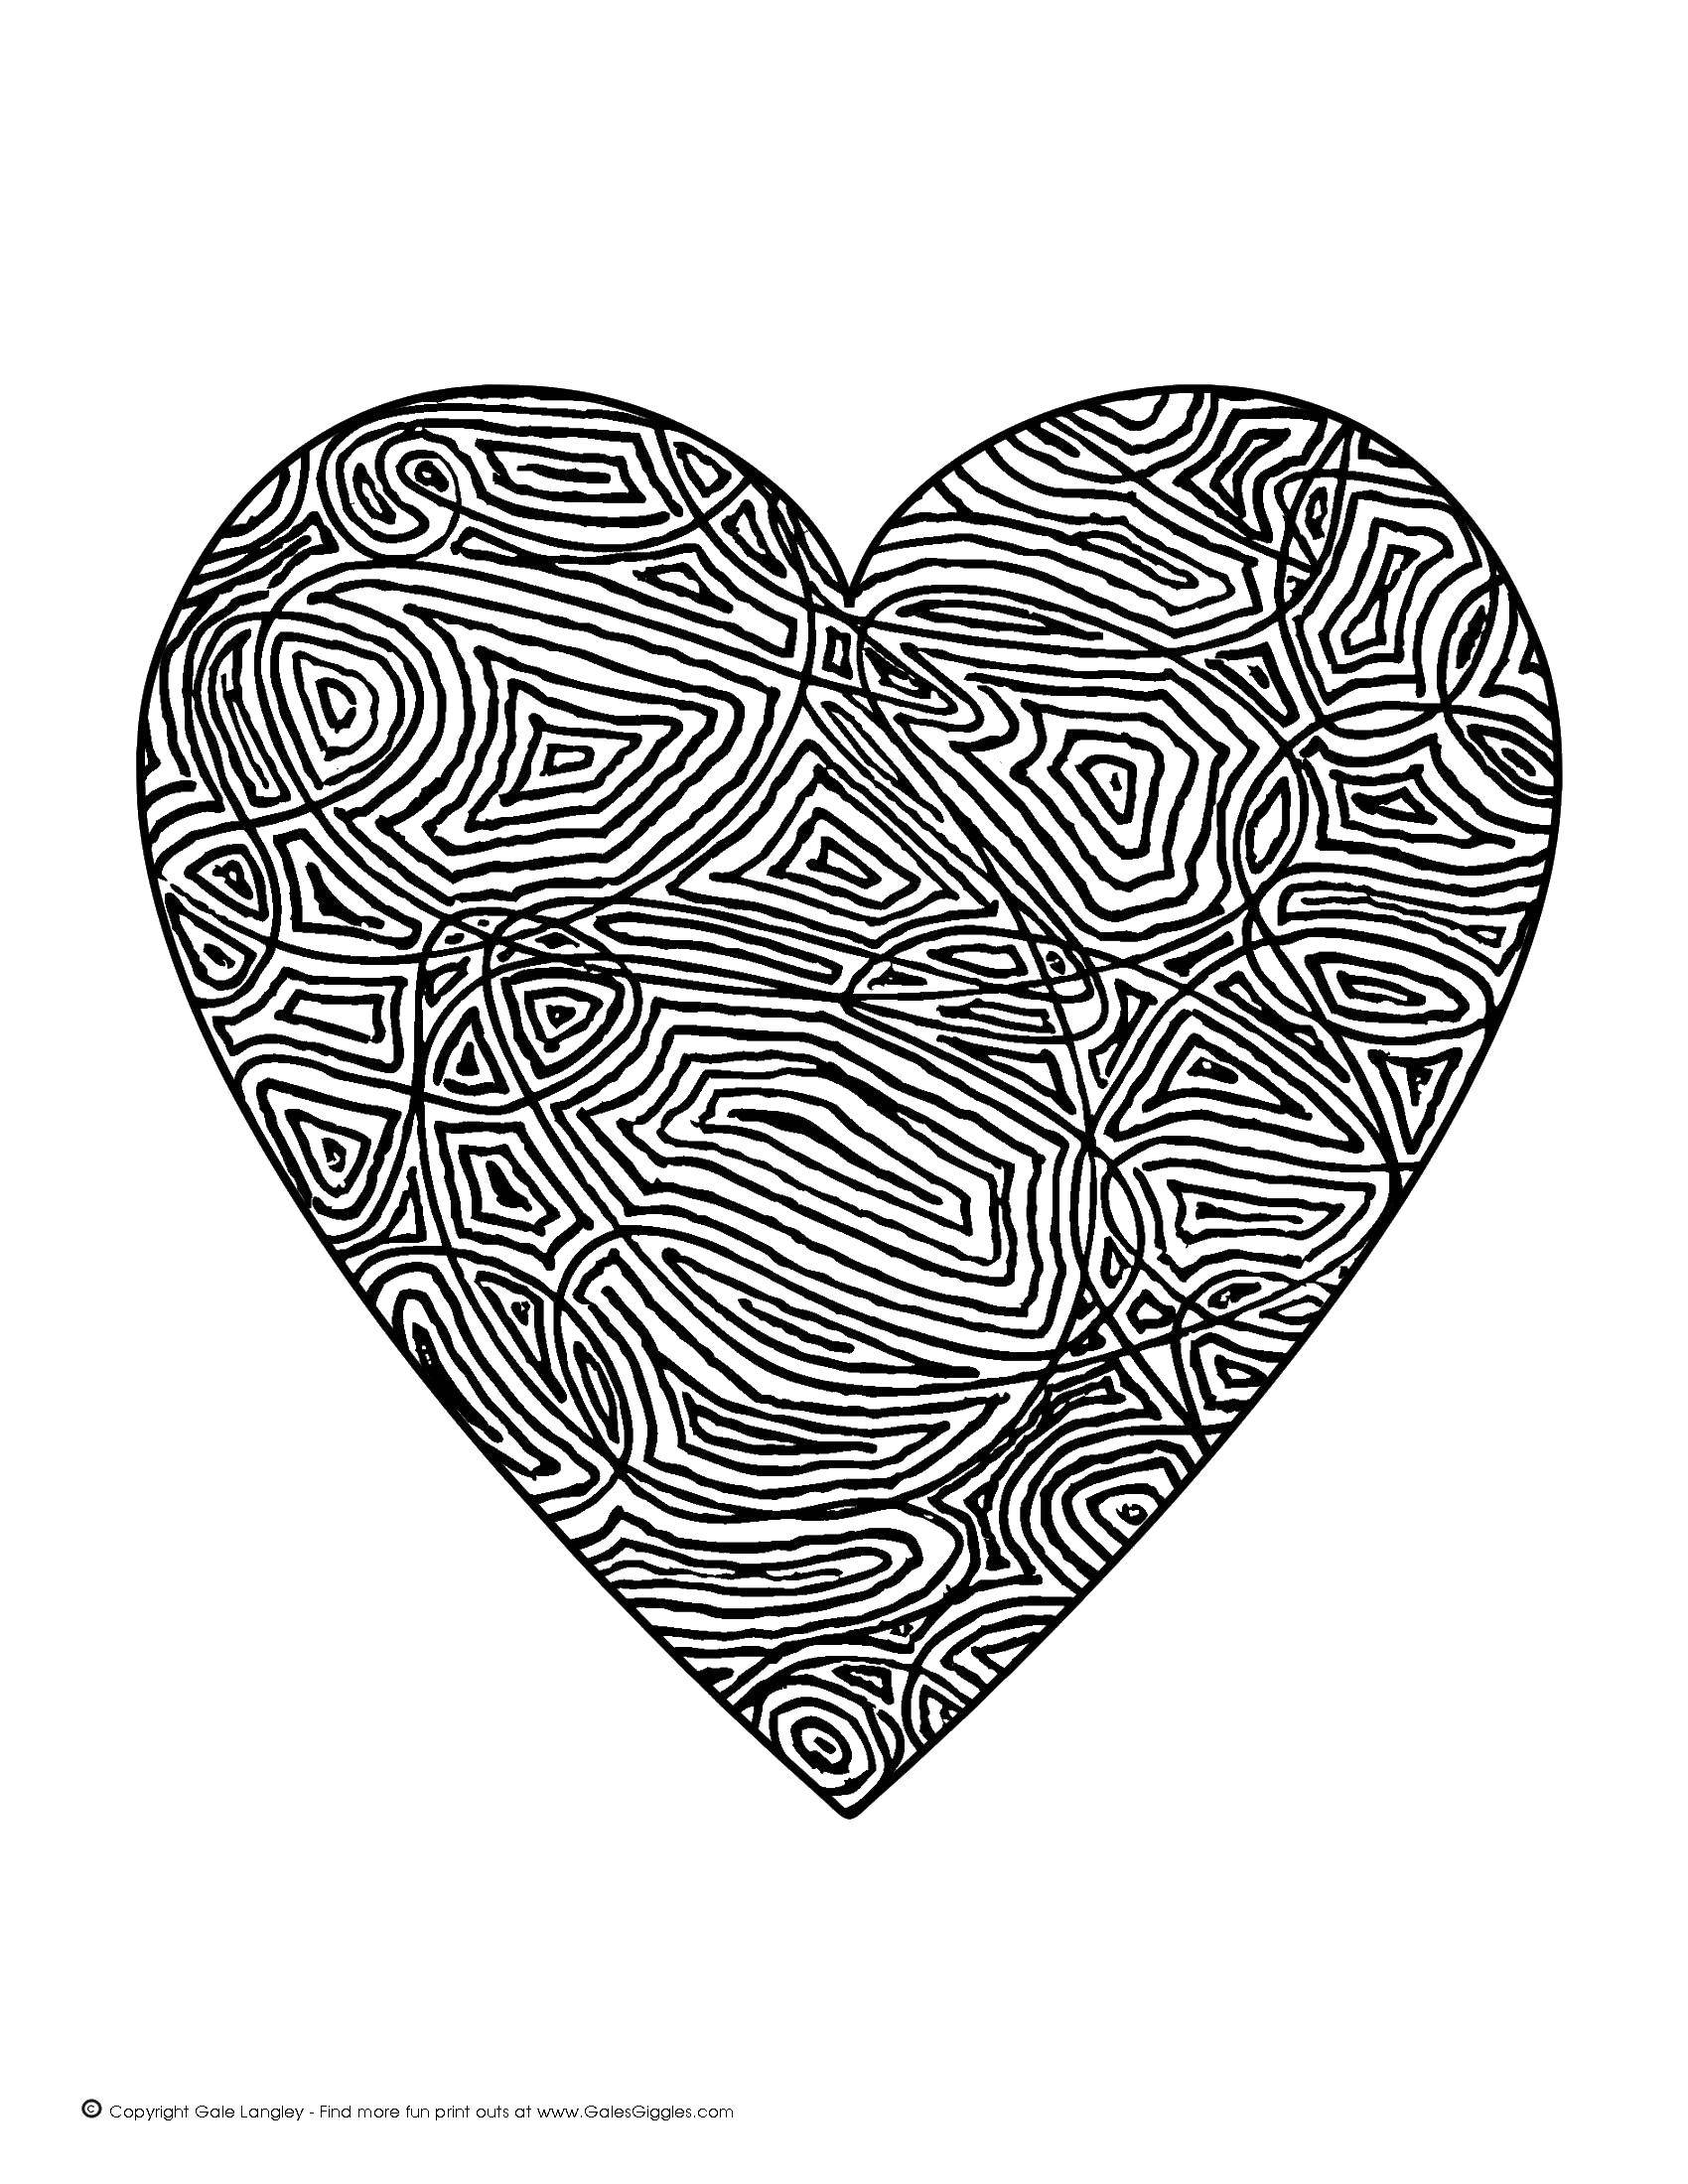 Coloring Heart patterns. Category Hearts. Tags:  form, heart.